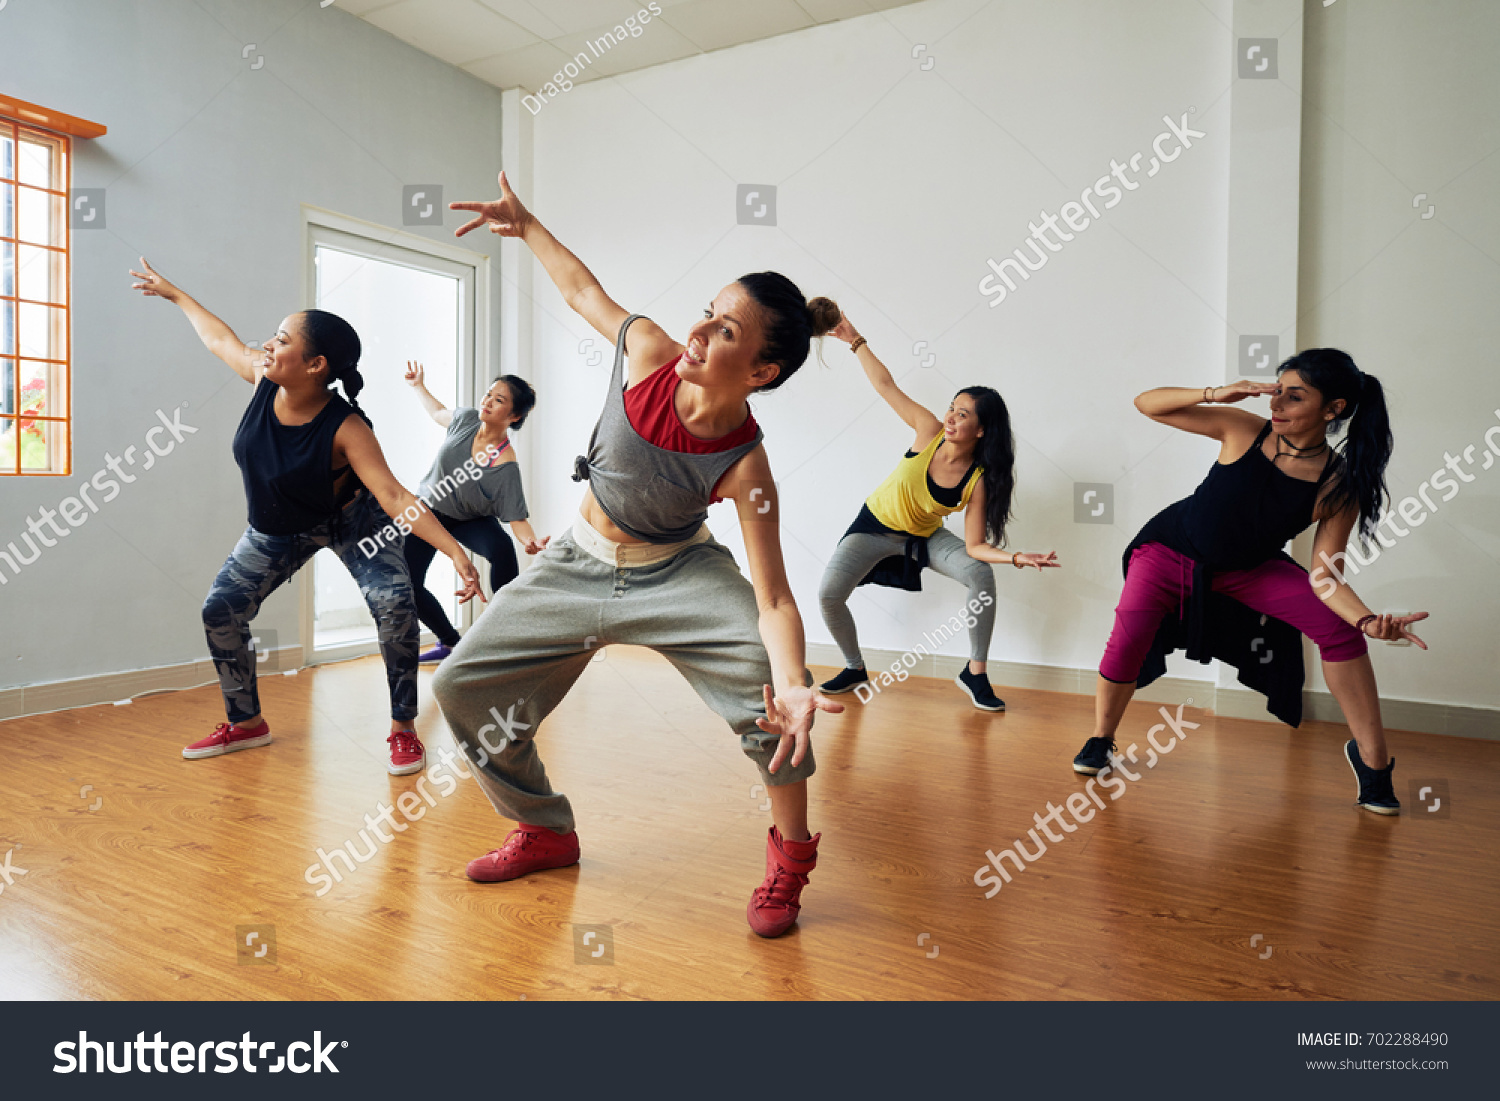 Group of energetic hip-hop dancers focused on training while gathered together in spacious dance hall #702288490